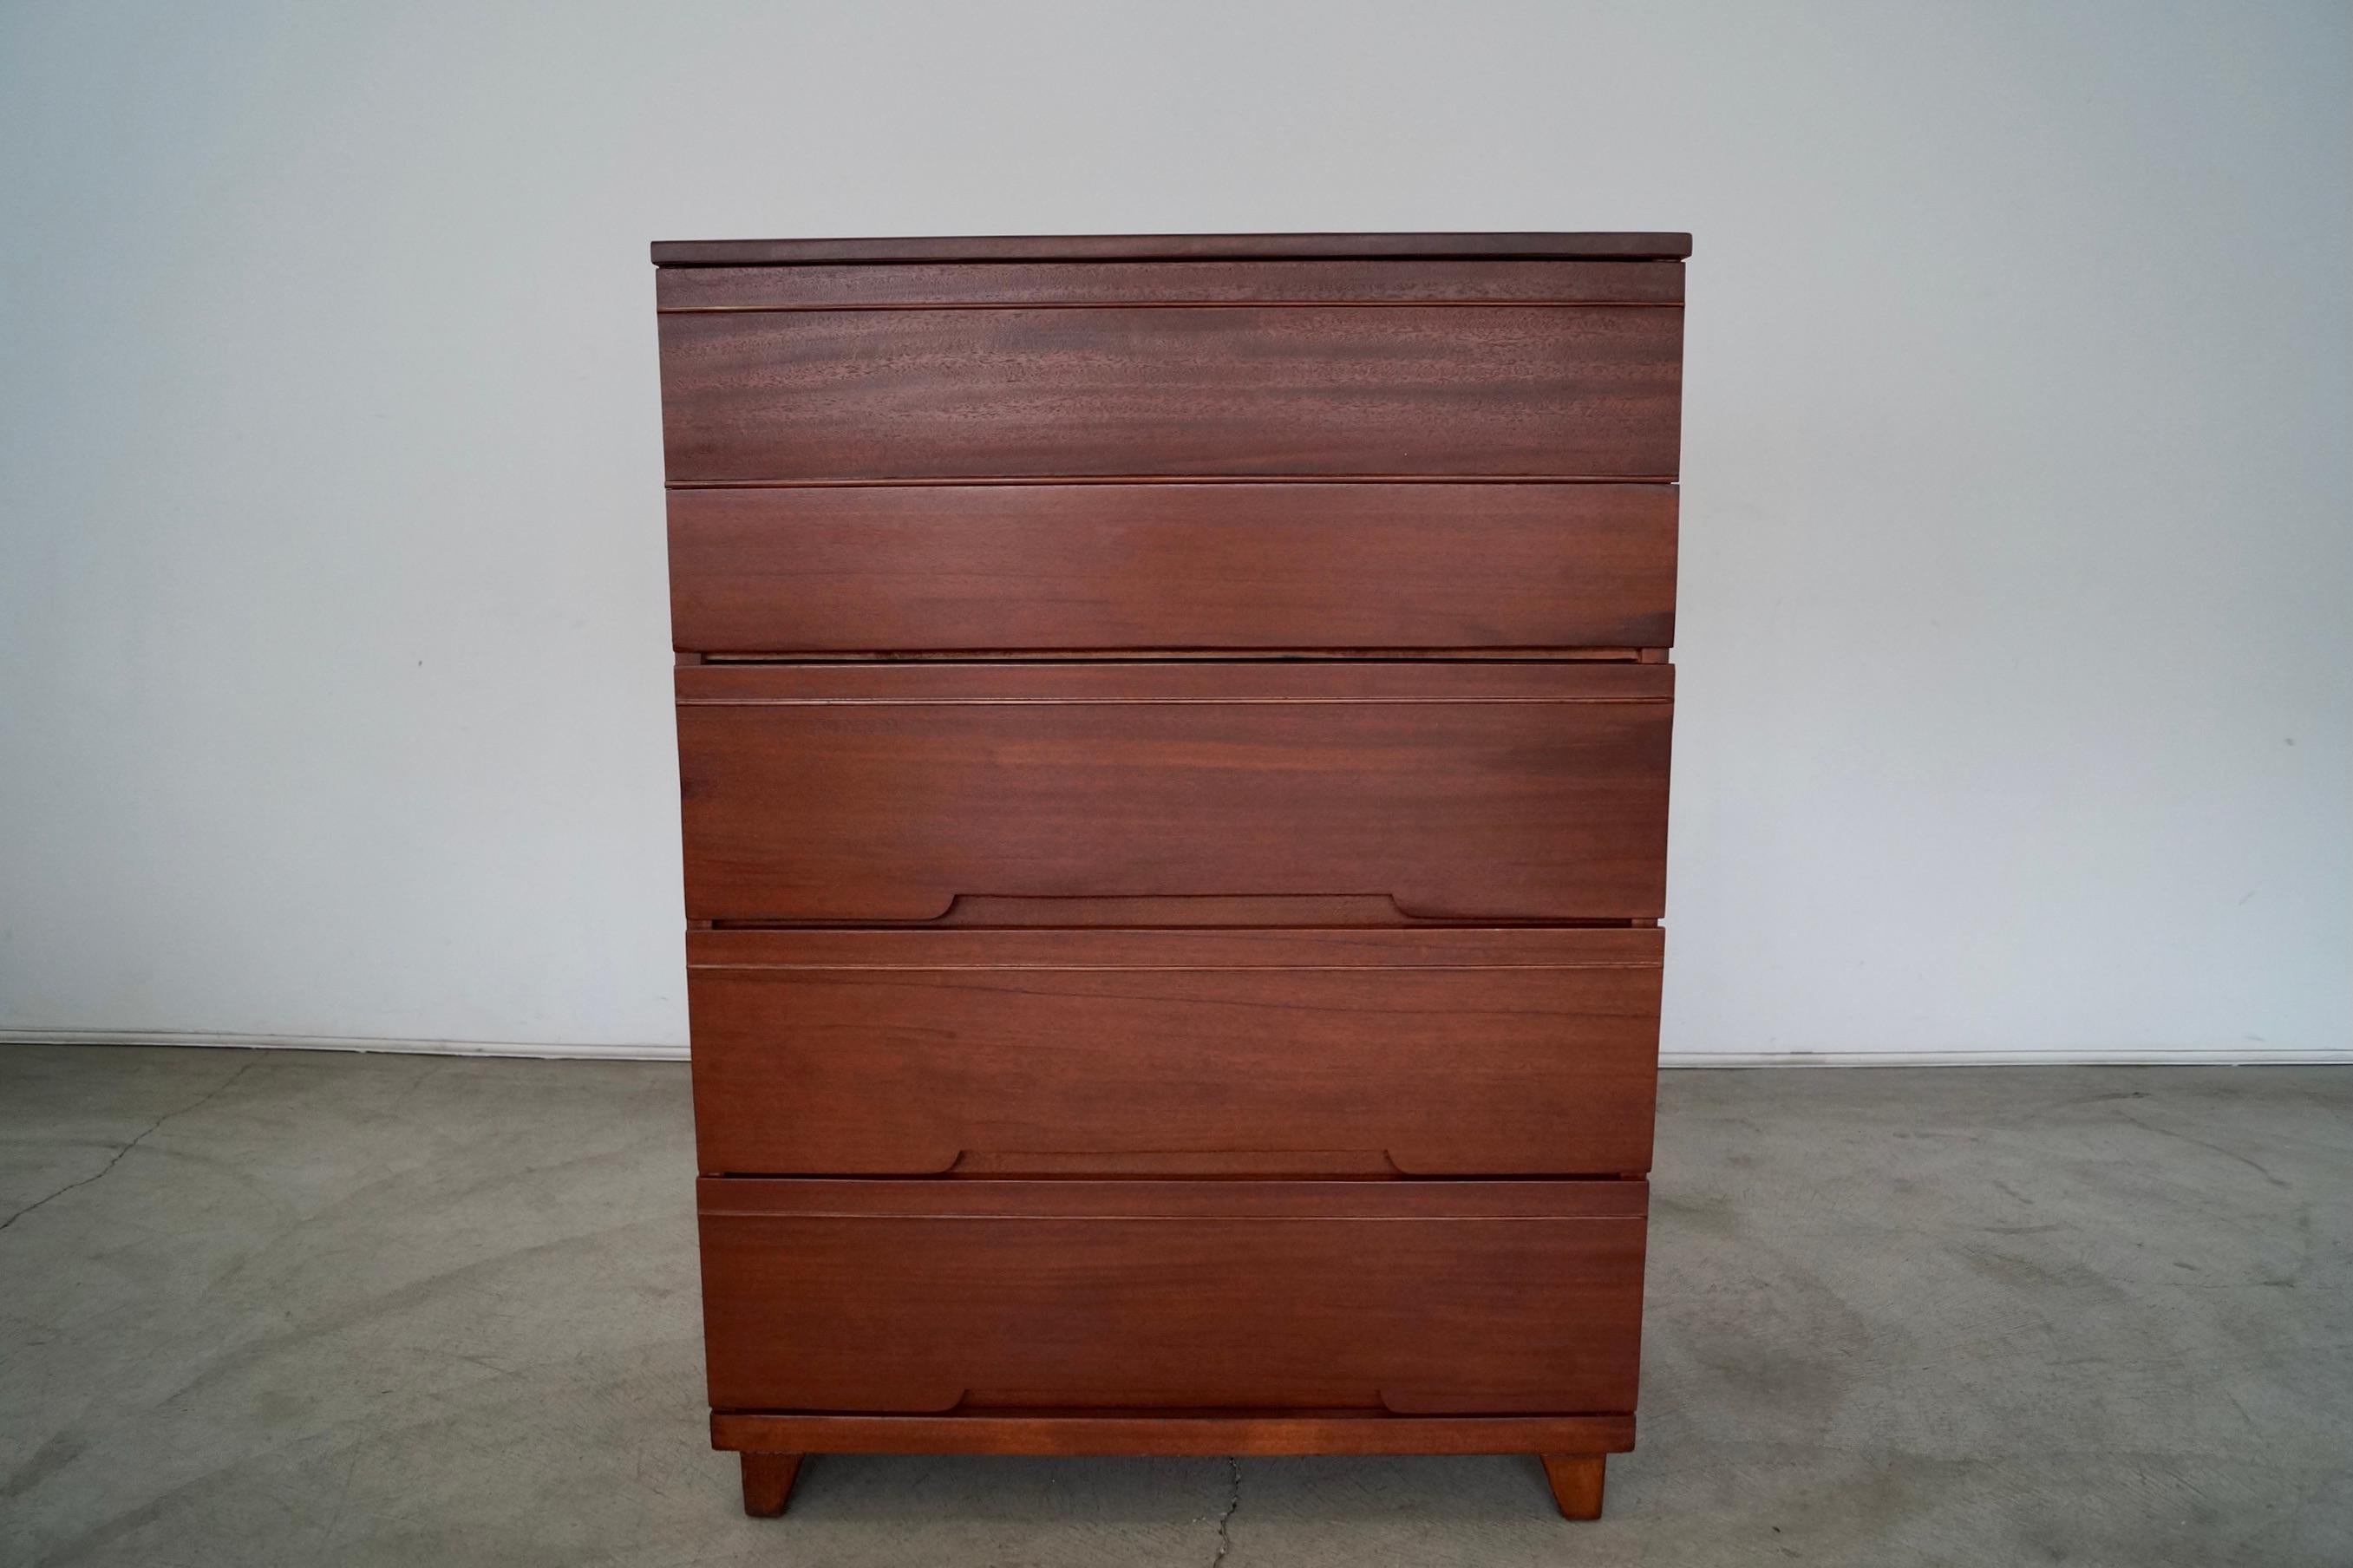 Vintage Mid-century Modern dresser for sale. From the late 1940’s, and made of mahogany. It was previously professionally refinished in walnut, and is a solid well made piece with vintage construction. All drawers are dovetailed on both ends. It has